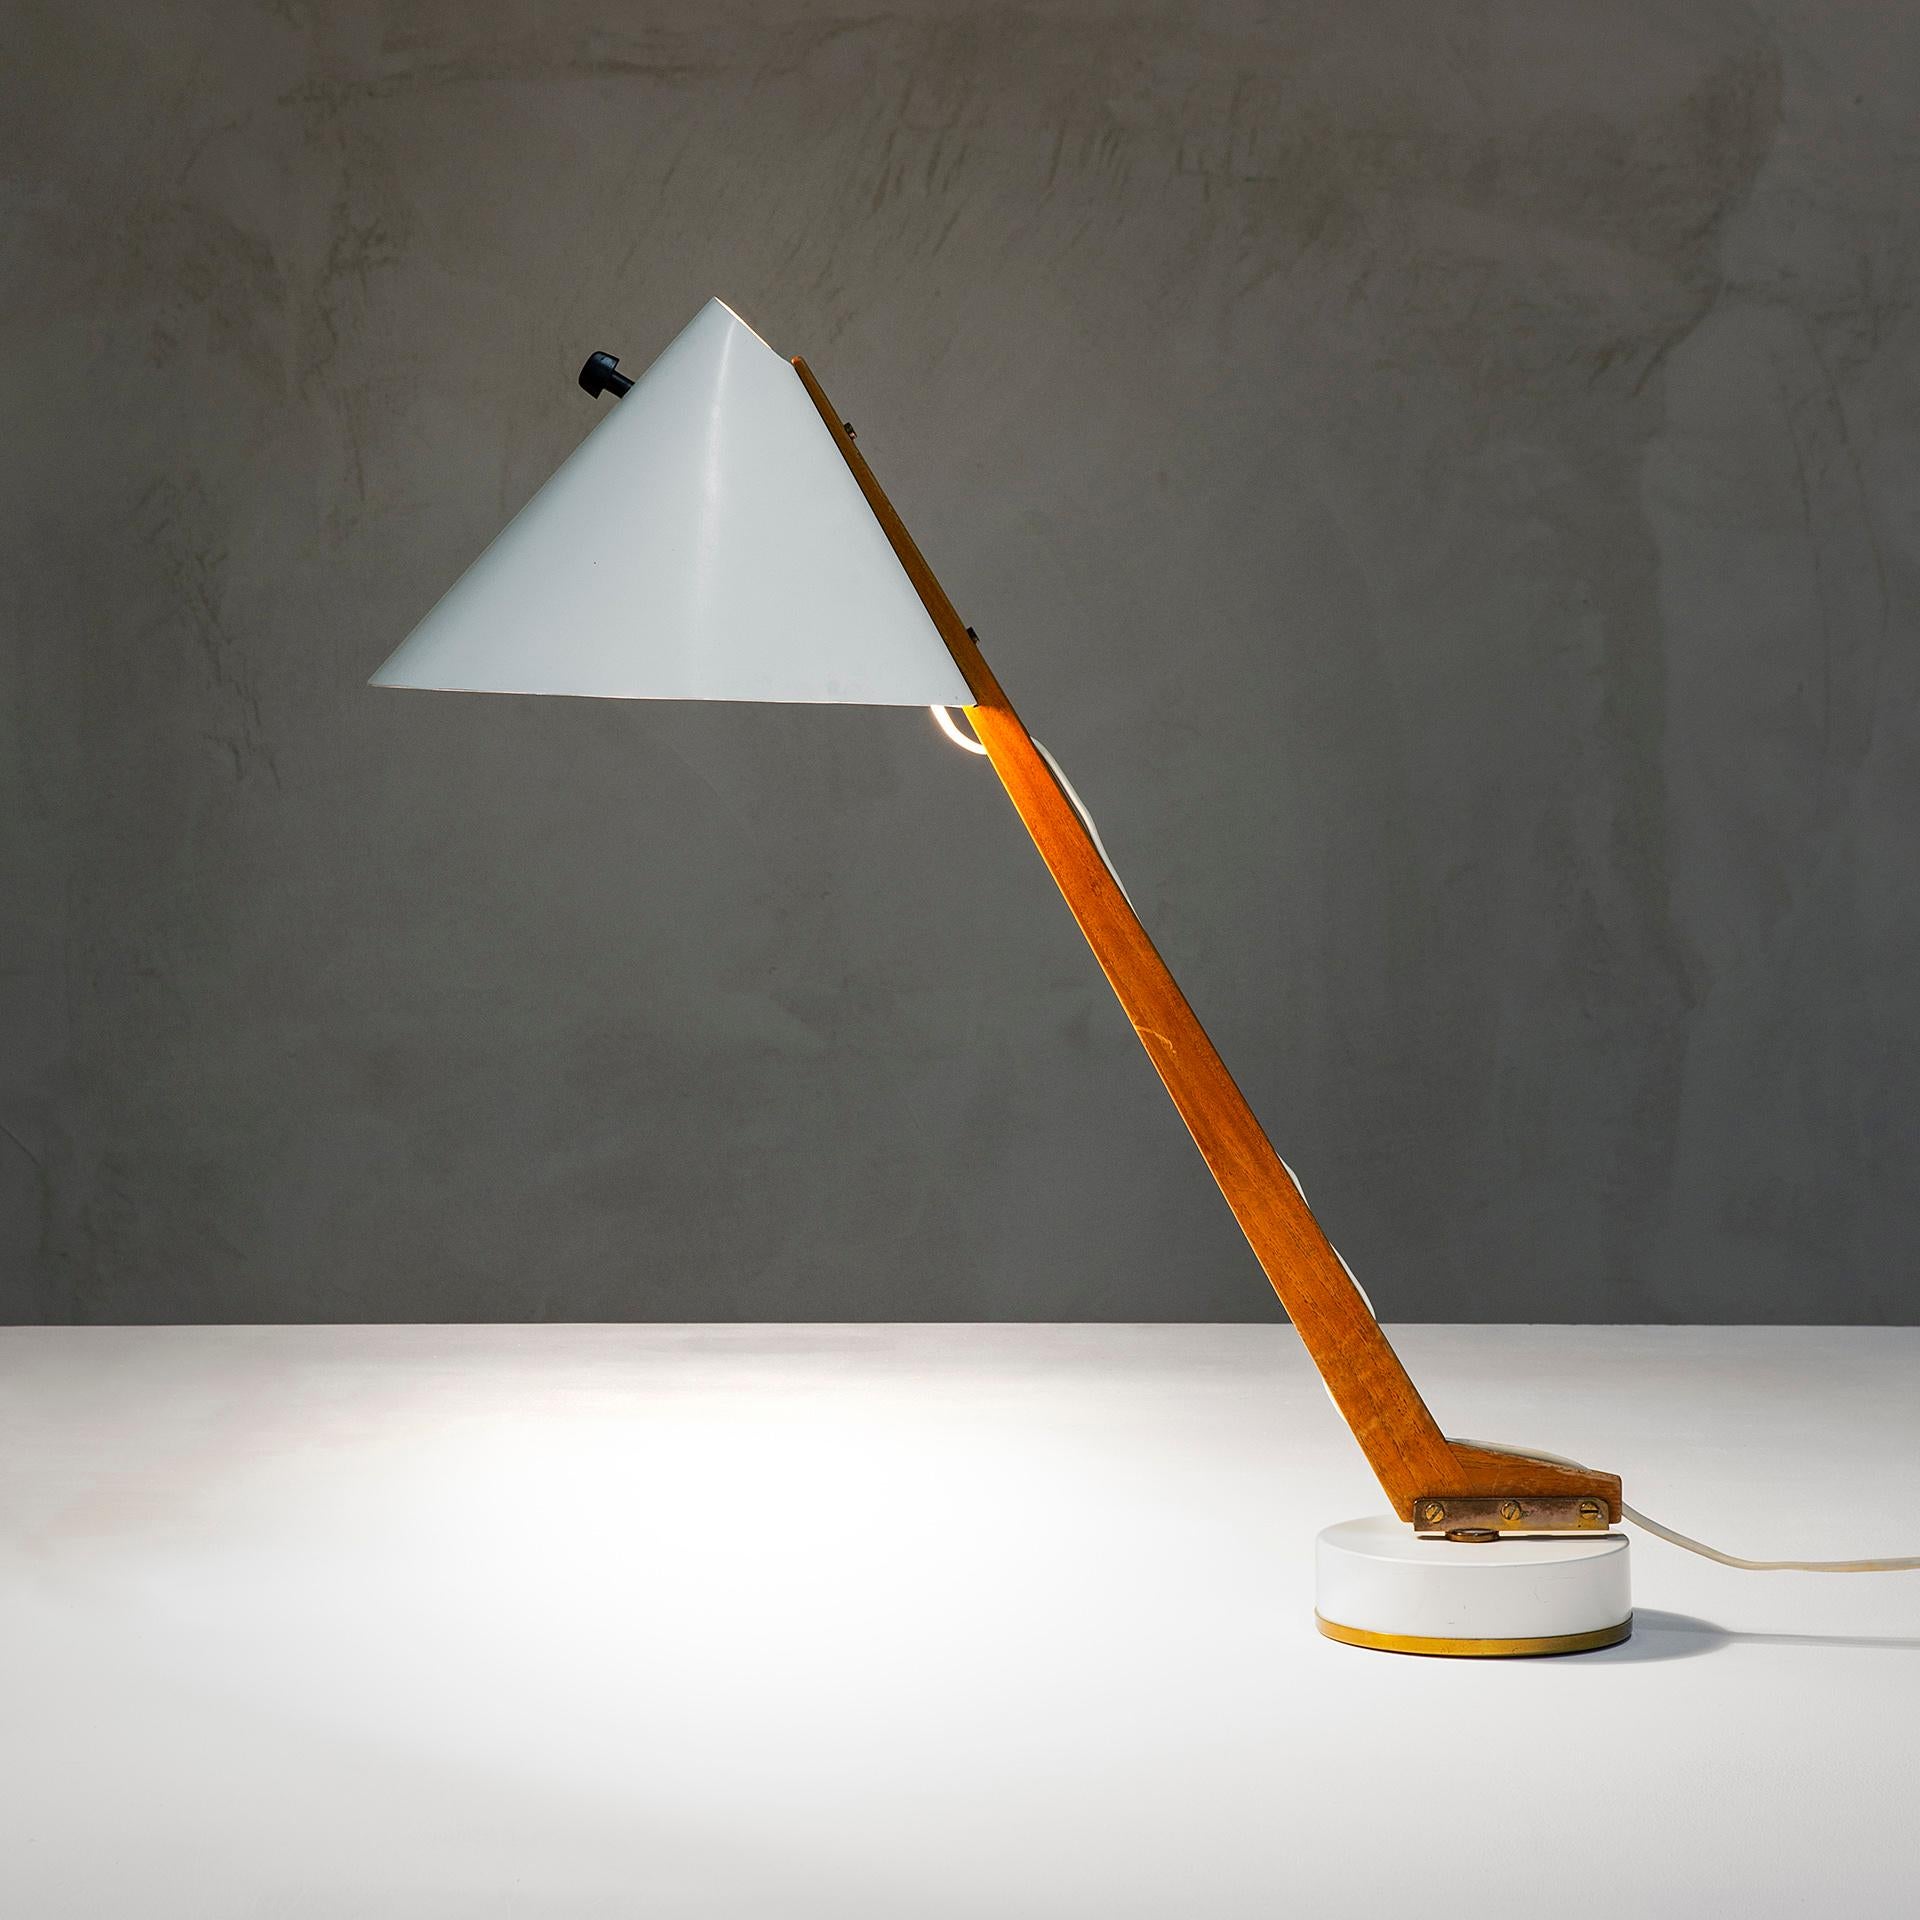 Some infos about the author of this lamp: considered a master of lighting, Hans Agne Jakobsson trained between the design offices of General Motors and the studio of designer Carl Malmsten before opening his own furniture company. Over the course in